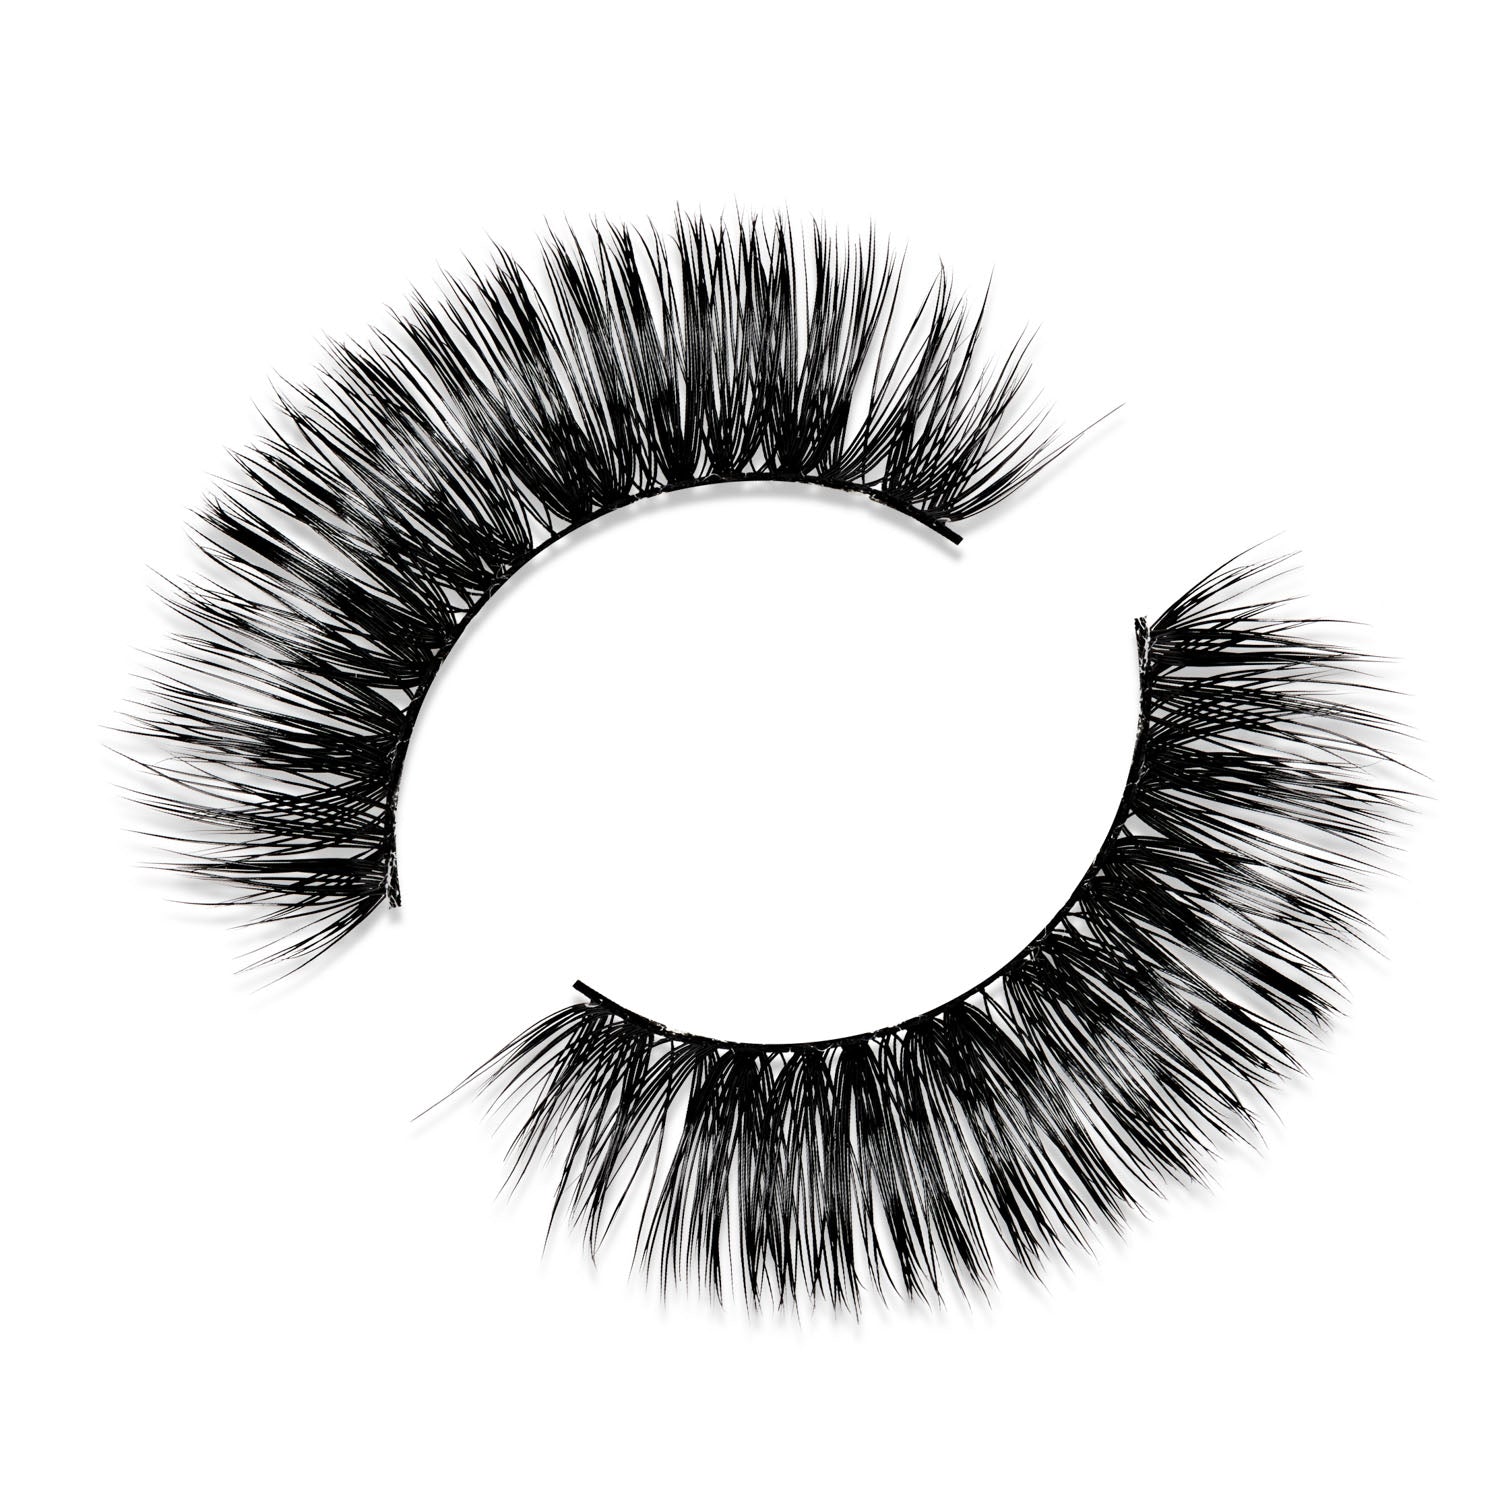 Luxury Mink strip Lashes #Righteous